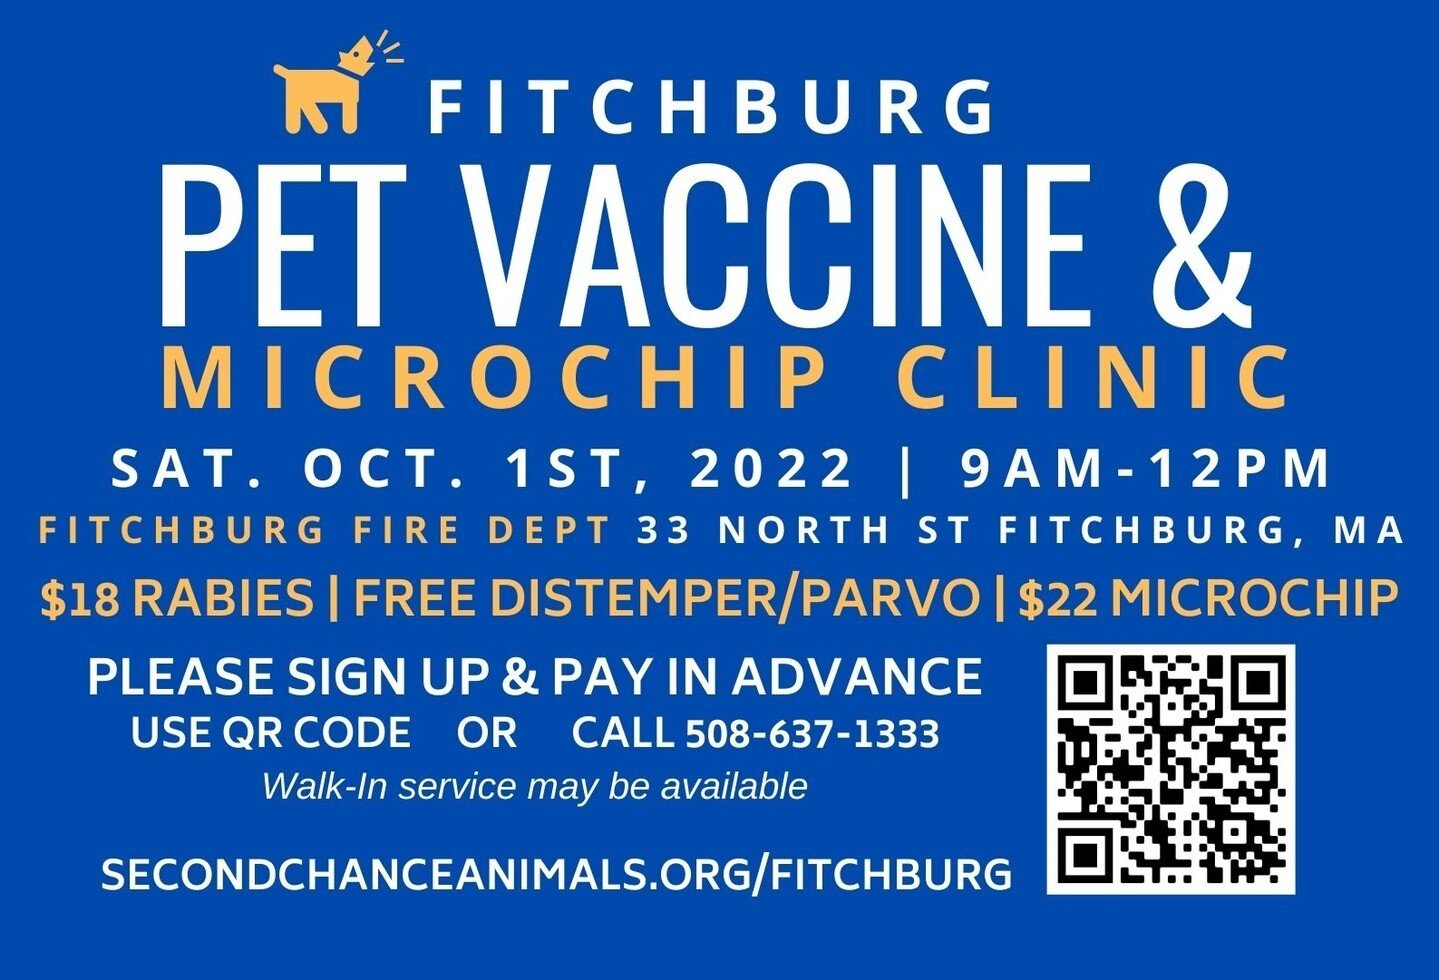 Low-Cost Pet Vaccine Clinic THIS Saturday Oct 1st 9am-12pm in Fitchburg